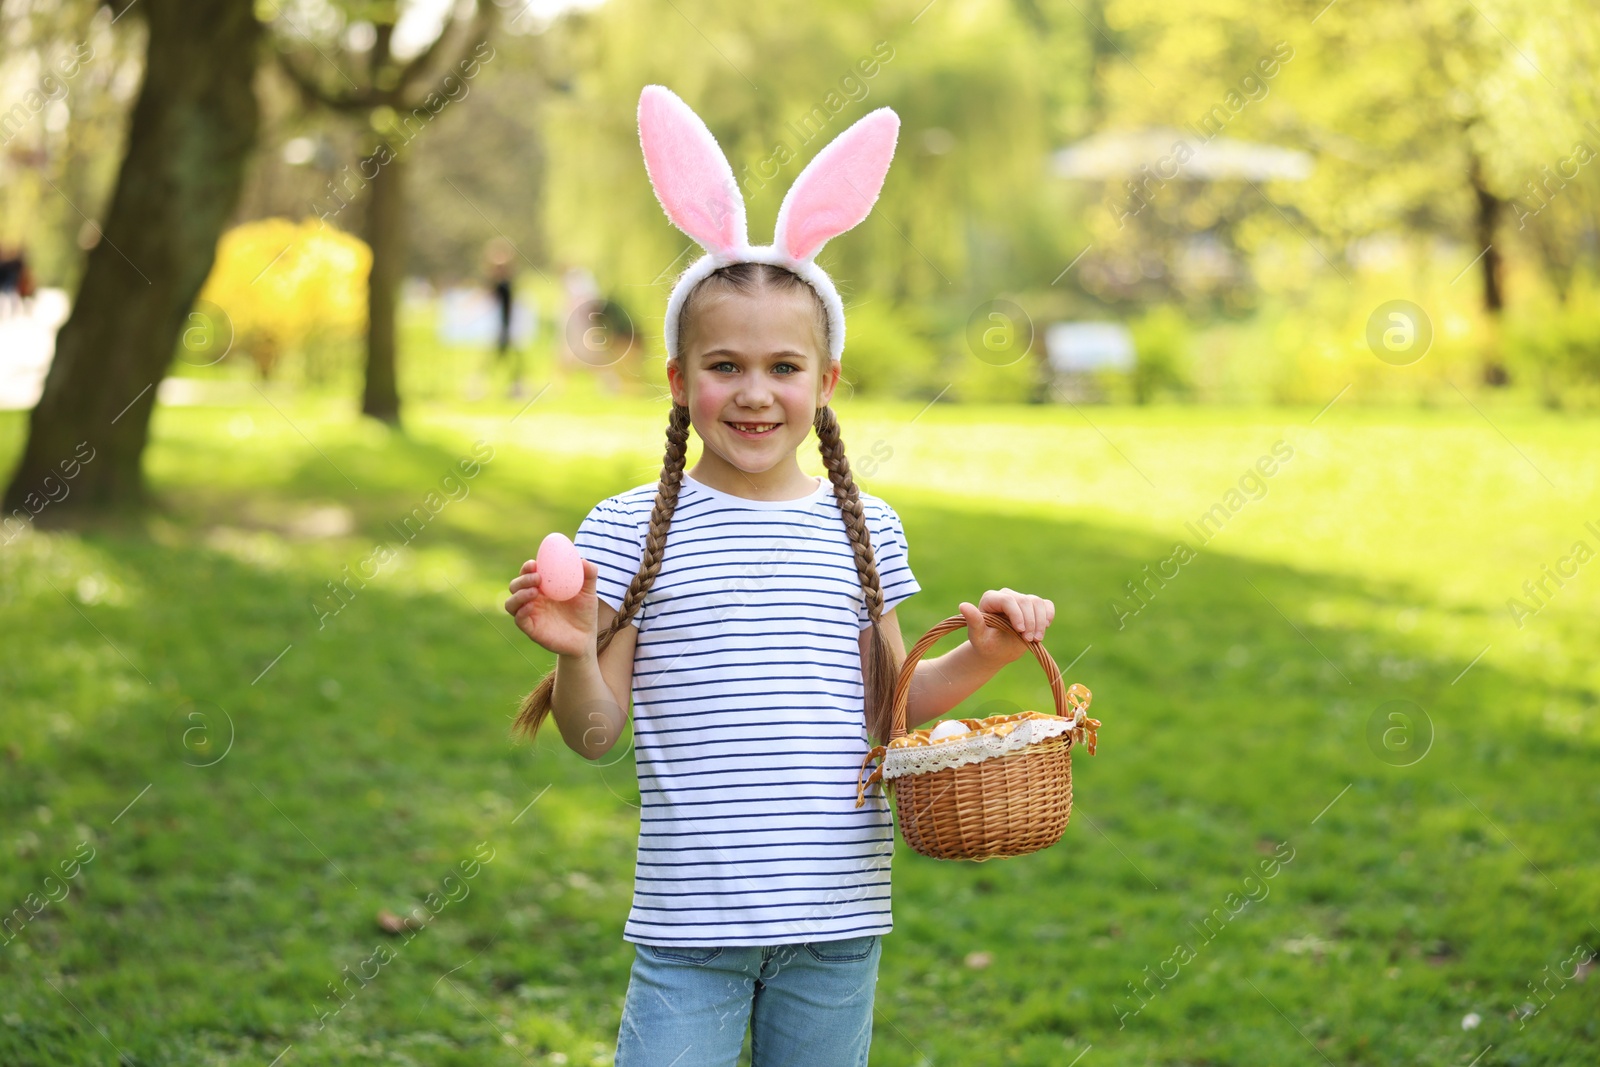 Photo of Easter celebration. Cute little girl in bunny ears holding wicker basket and painted egg outdoors